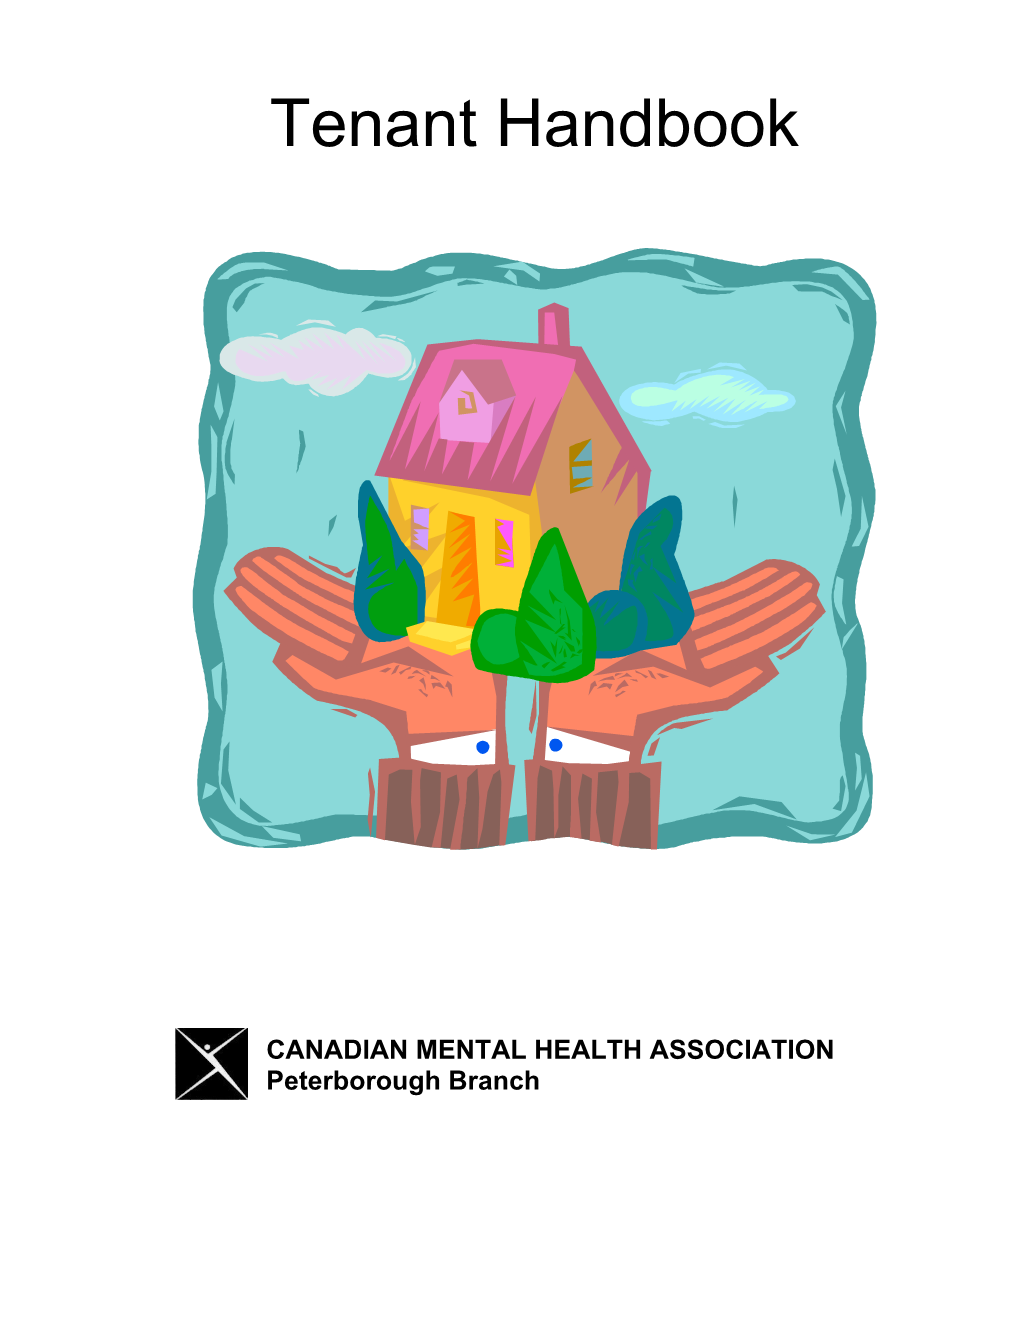 Who Is the Canadian Mental Health Association?